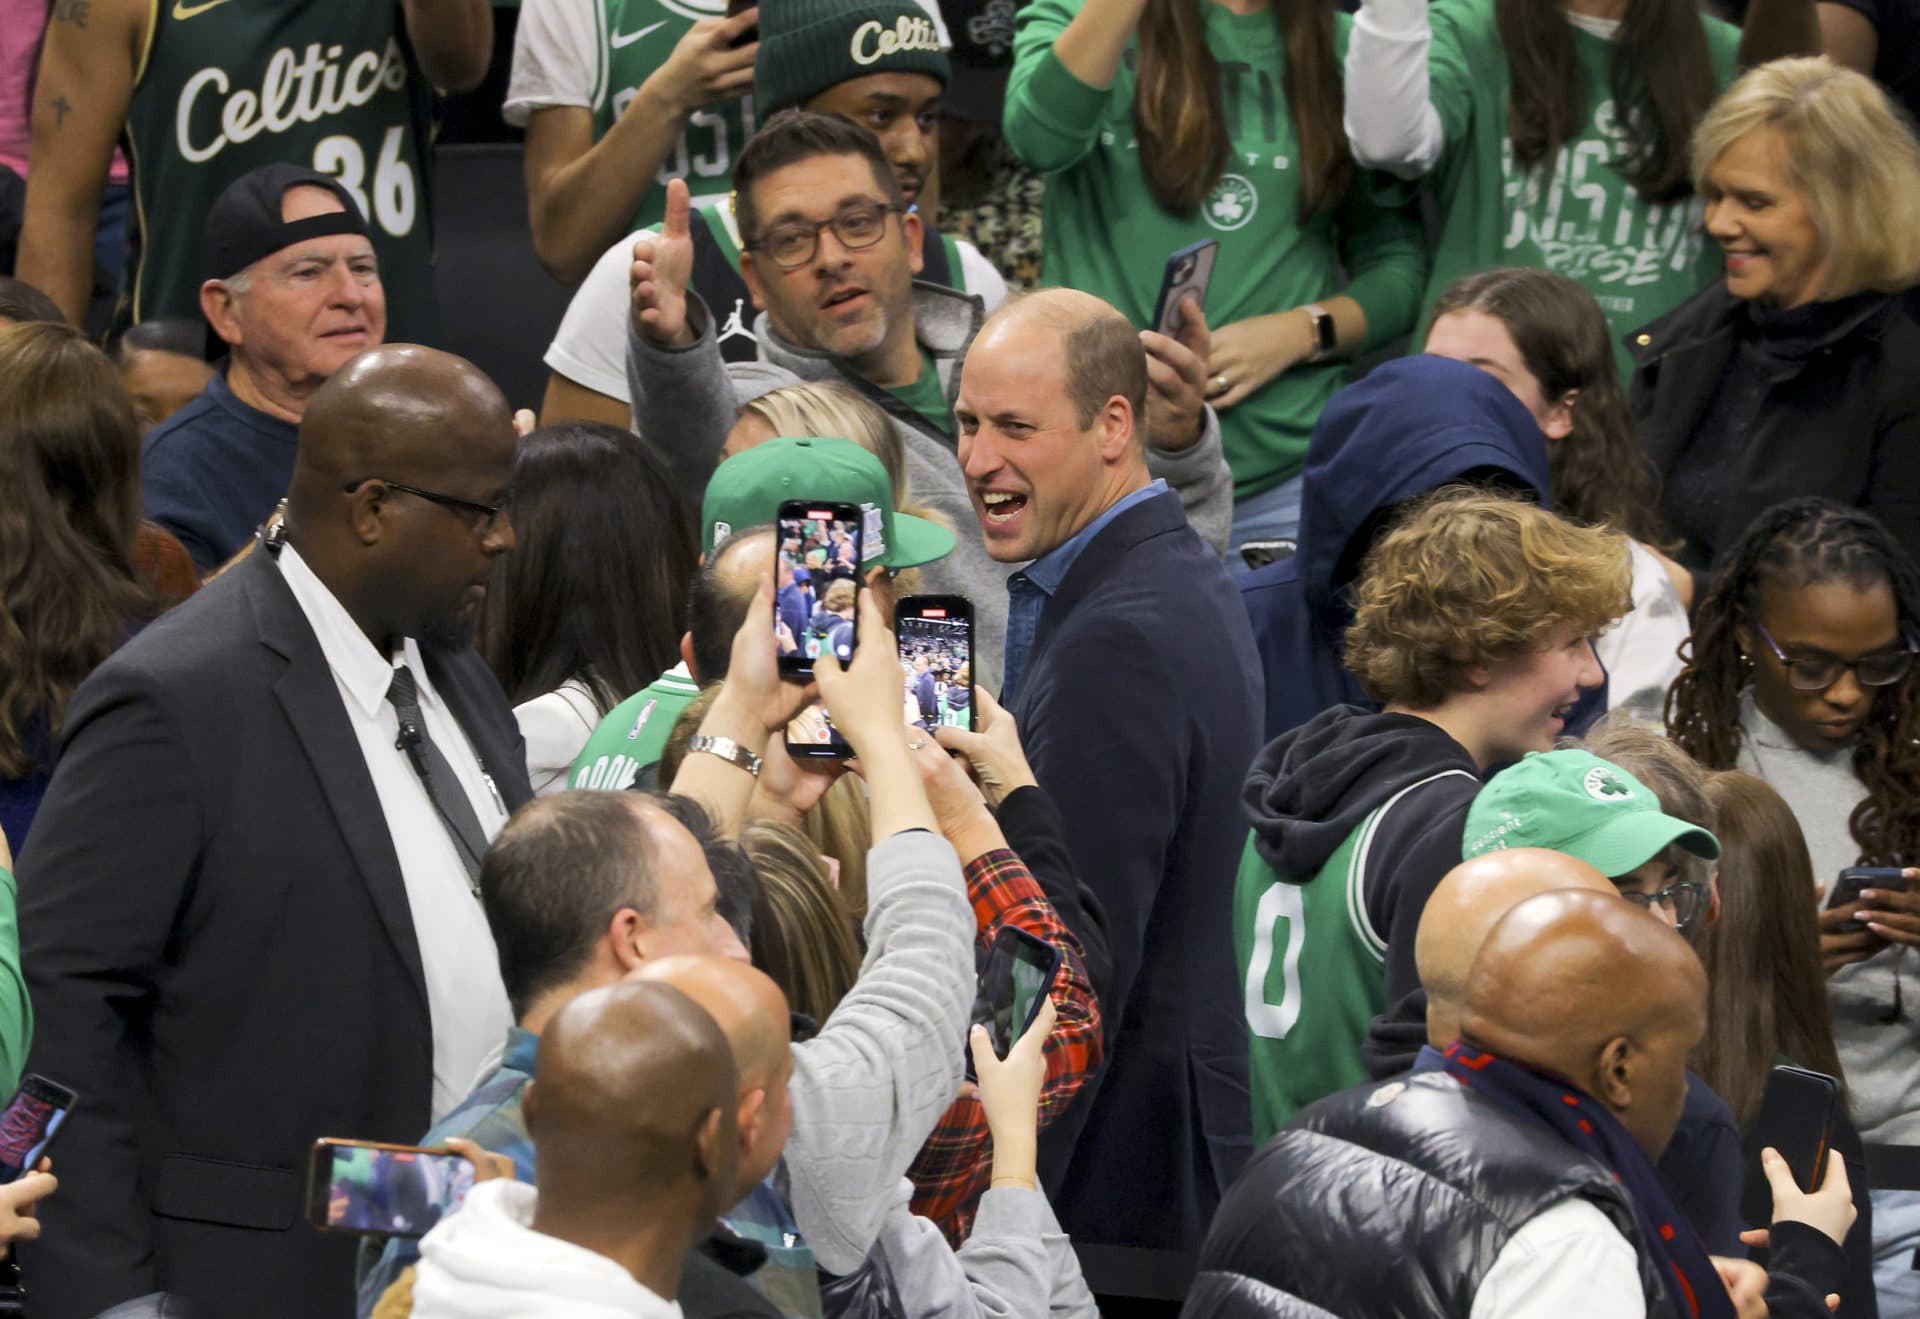 Prince William walks during halftime of an NBA basketball game between the Boston Celtics and the Miami Heat , Wednesday, Nov. 30, 2022. (Brian Snyder/AP)